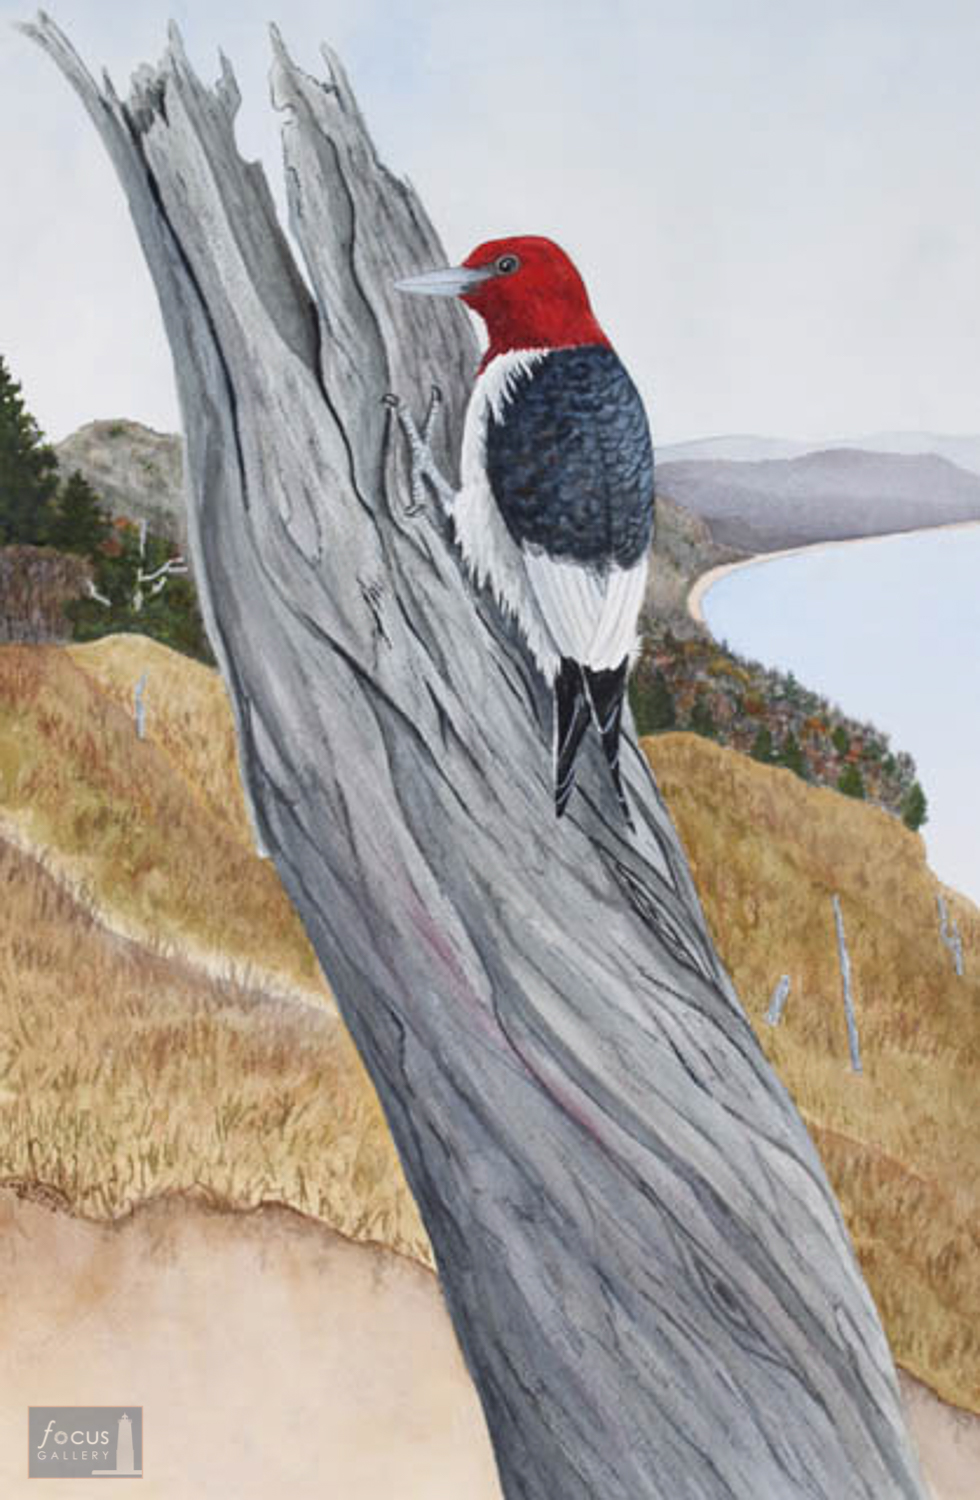 Original watercolor painting of a Red-headed Woodpecker bird on a dead ghost tree in the Empire Bluffs of Sleeping Bear Dunes National Lakeshore in Michigan.